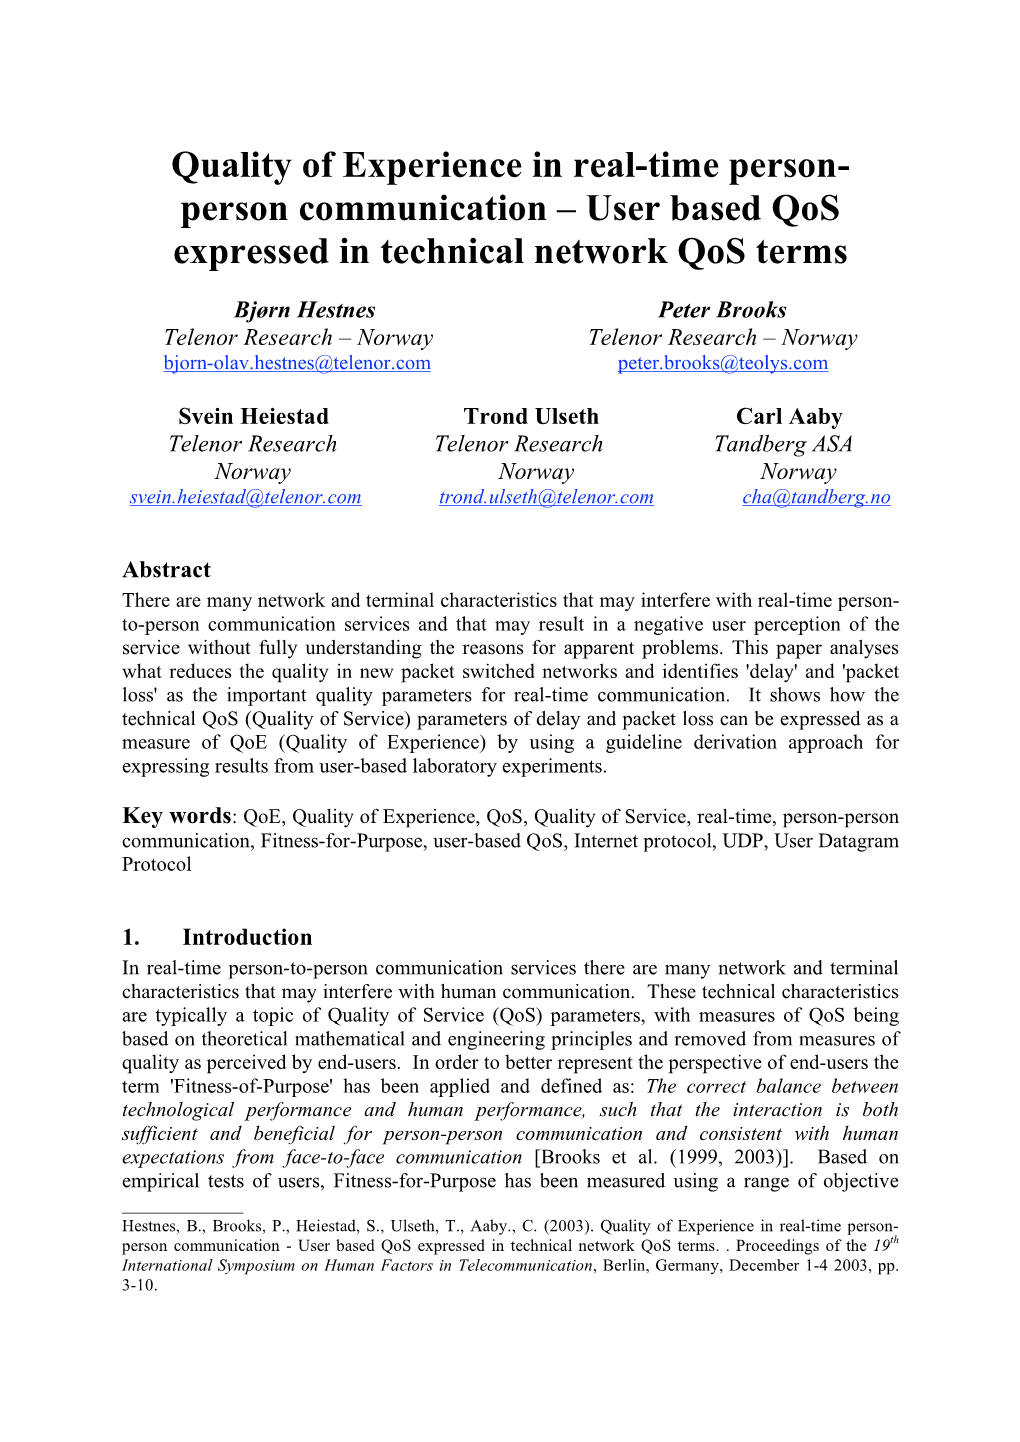 Quality of Experience in Real-Time Person- Person Communication – User Based Qos Expressed in Technical Network Qos Terms